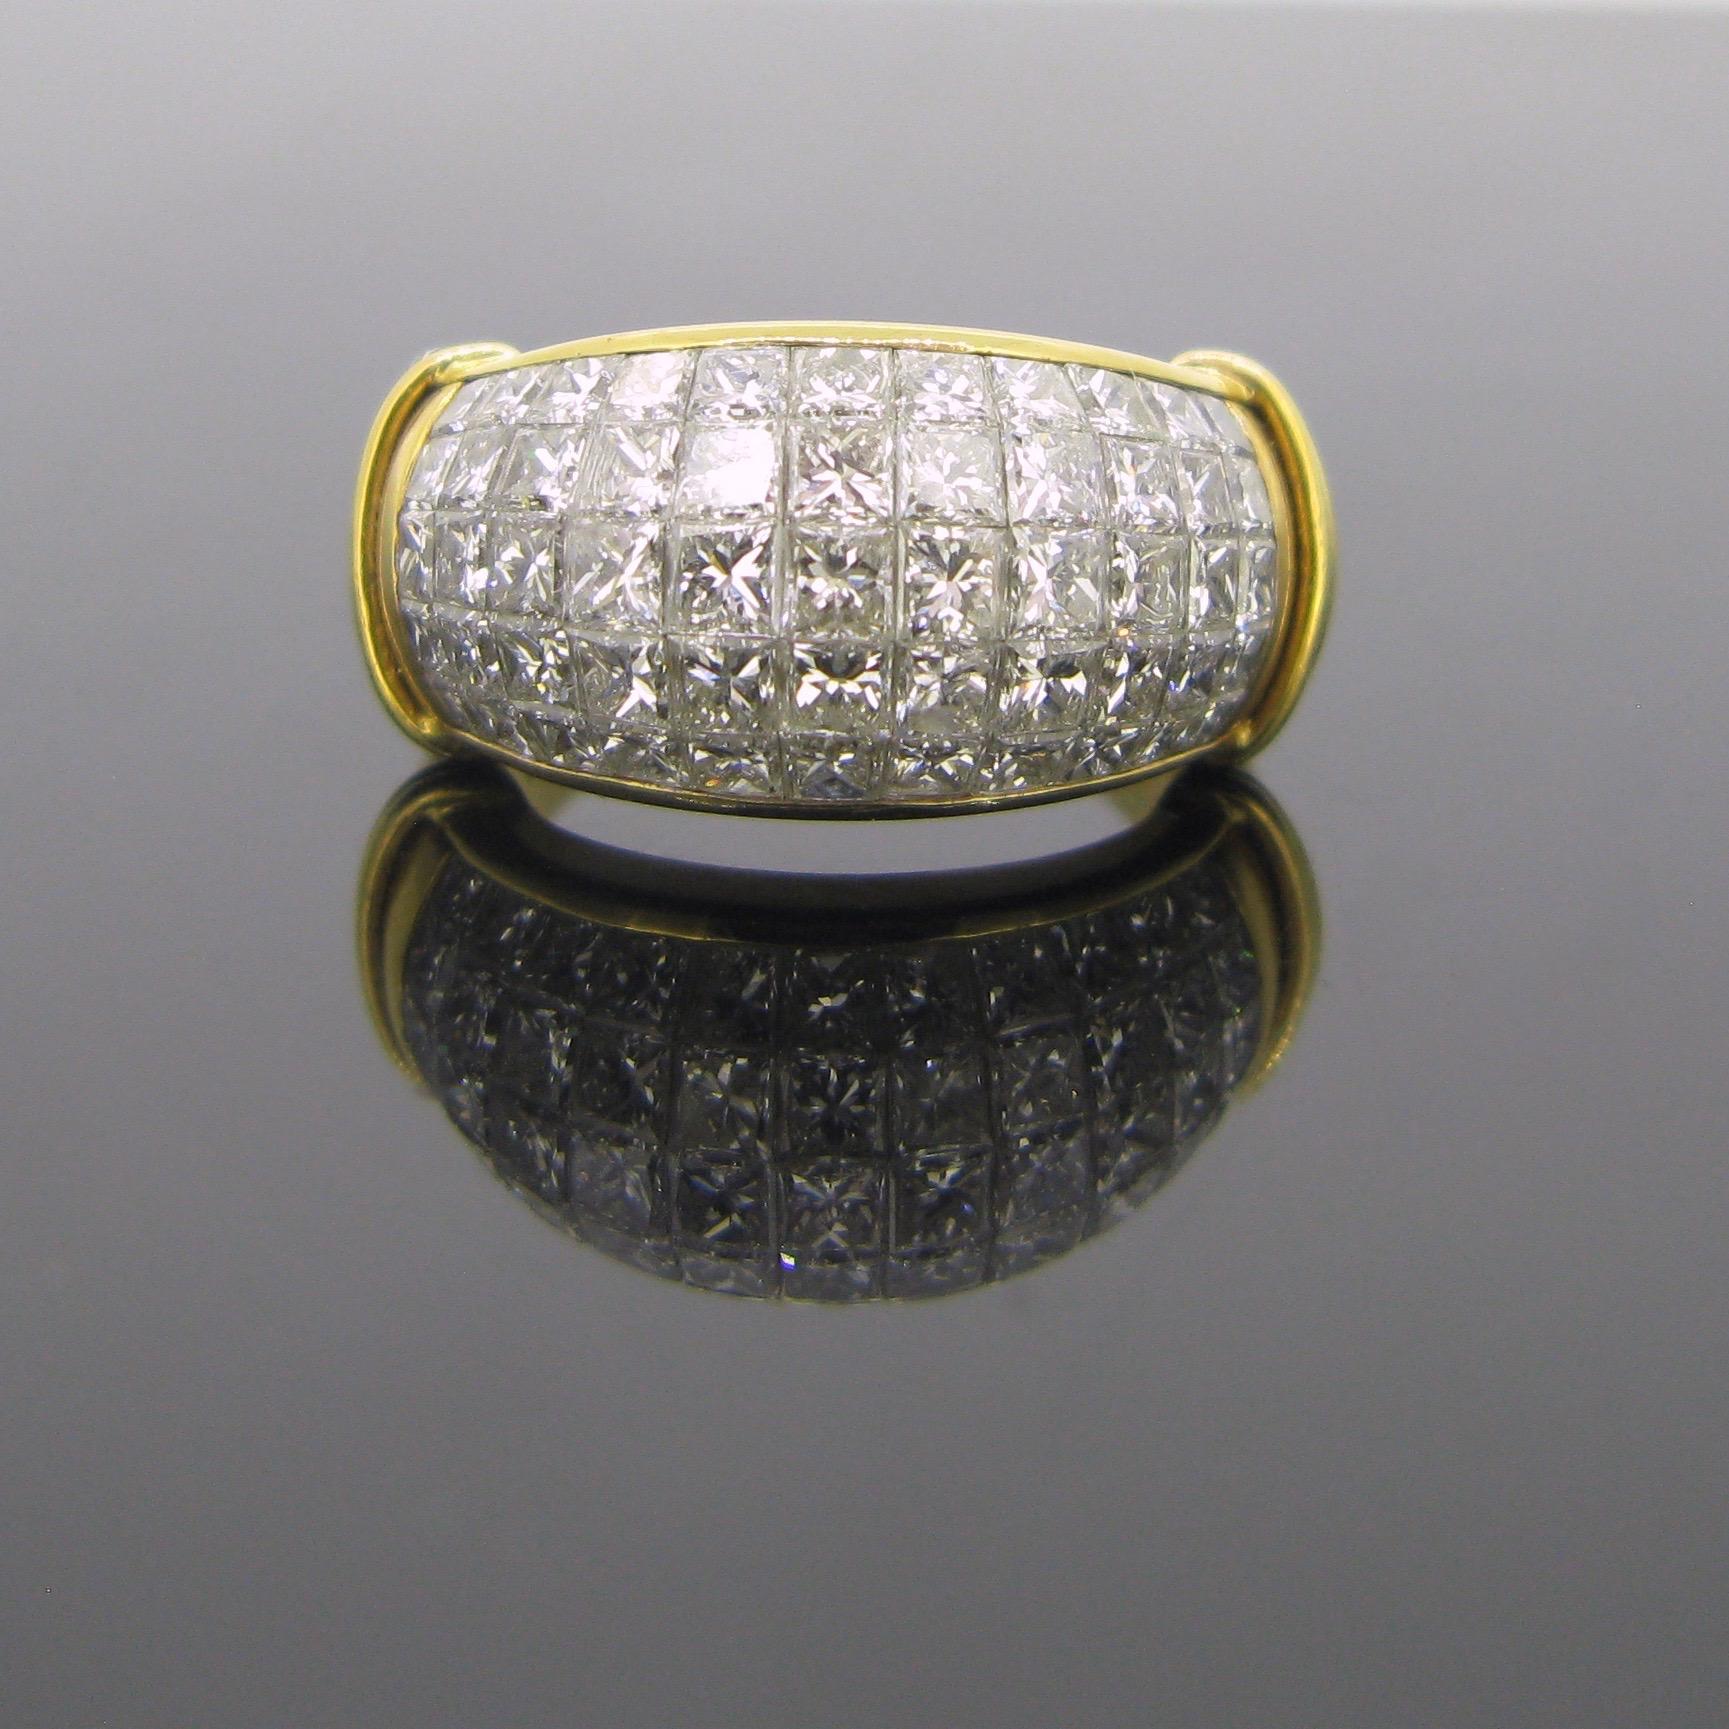 This ring presents a pave set diamonds. Those ones are set with a technic we call le “Serti Mysterieux”, the mysterious setting. As we can’t see the prongs we might wonder how the diamonds are fixed on the mount. They are actually set on rails and